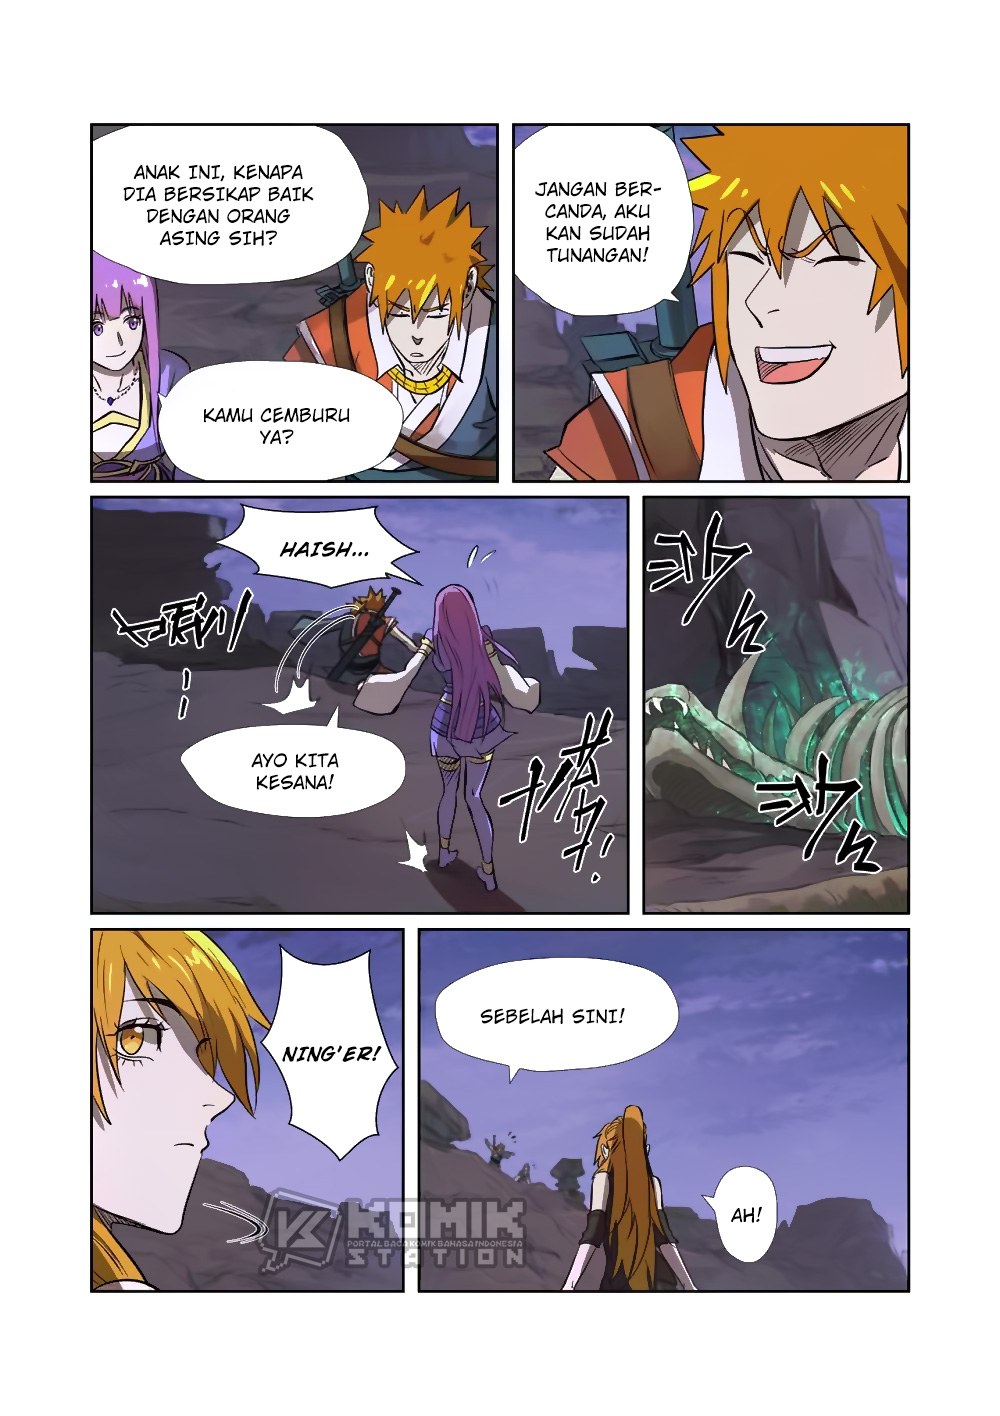 Tales of Demons and Gods Chapter 261-5